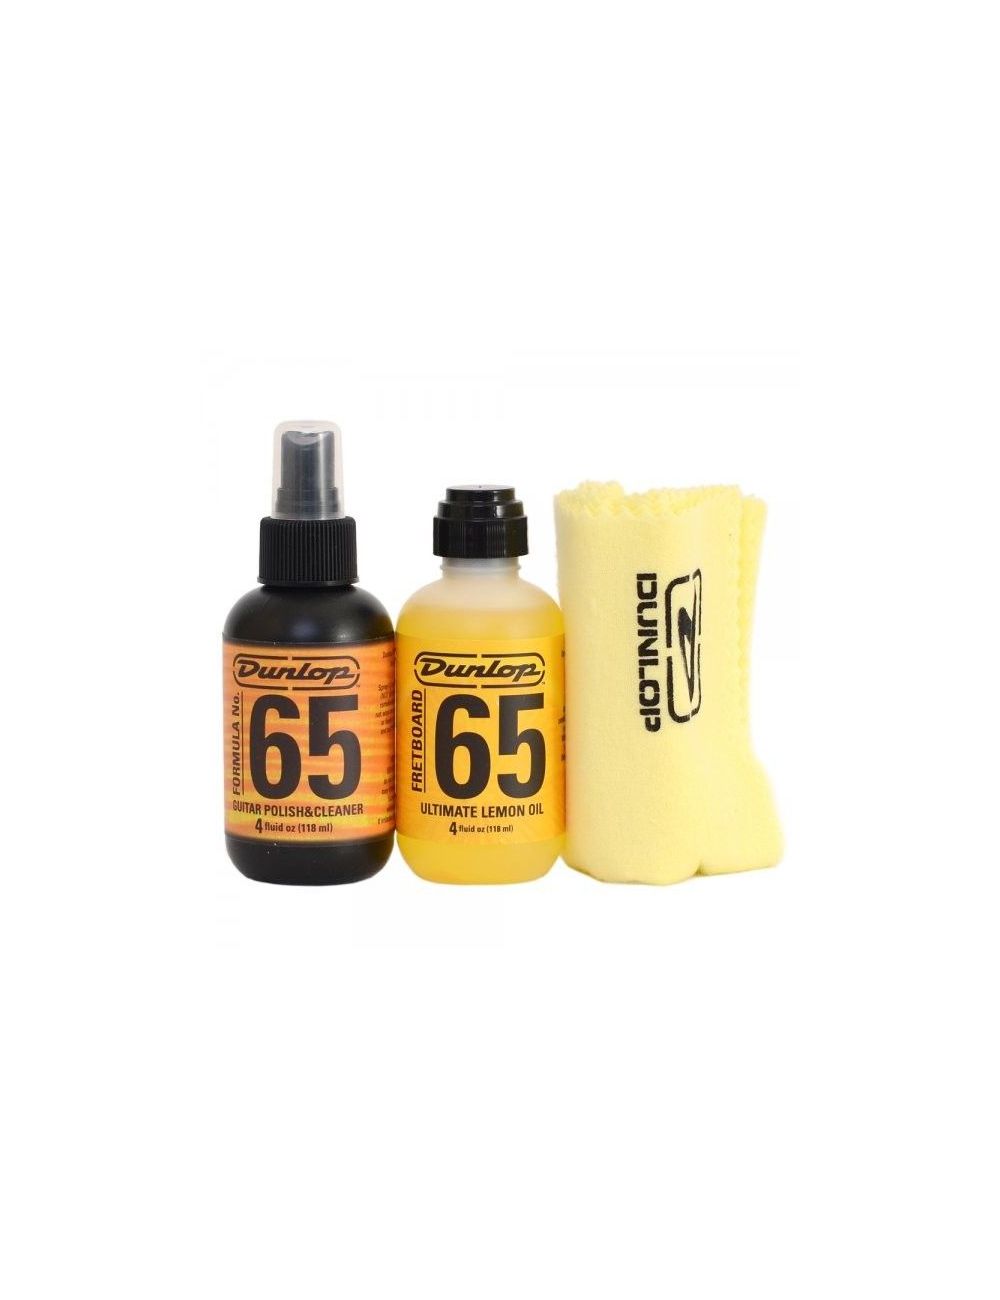 Dunlop 6503 Body and Fingerboard Cleaning Kit 6503 Guitar care